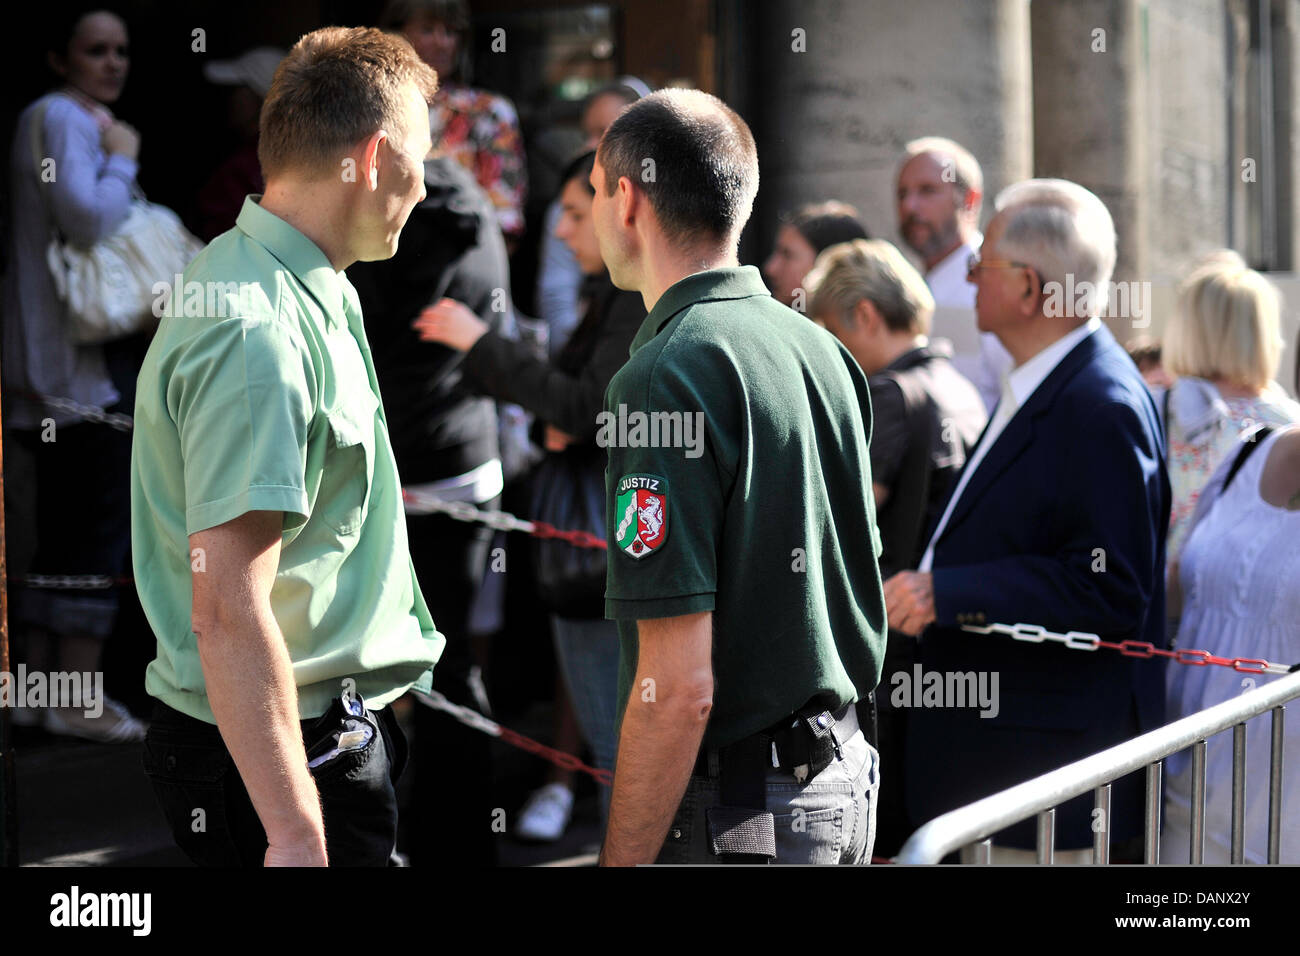 Court officers observes the visitors waiting in front of the courthouse in Krefeld, Germany, 12 July 2011. The trial begins into the muder of 10 year old Mirco and the accused has admitted to killing the boy. Mirco disappeared on his way home and after 145 days, his body was found. Photo: Marius Becker Stock Photo